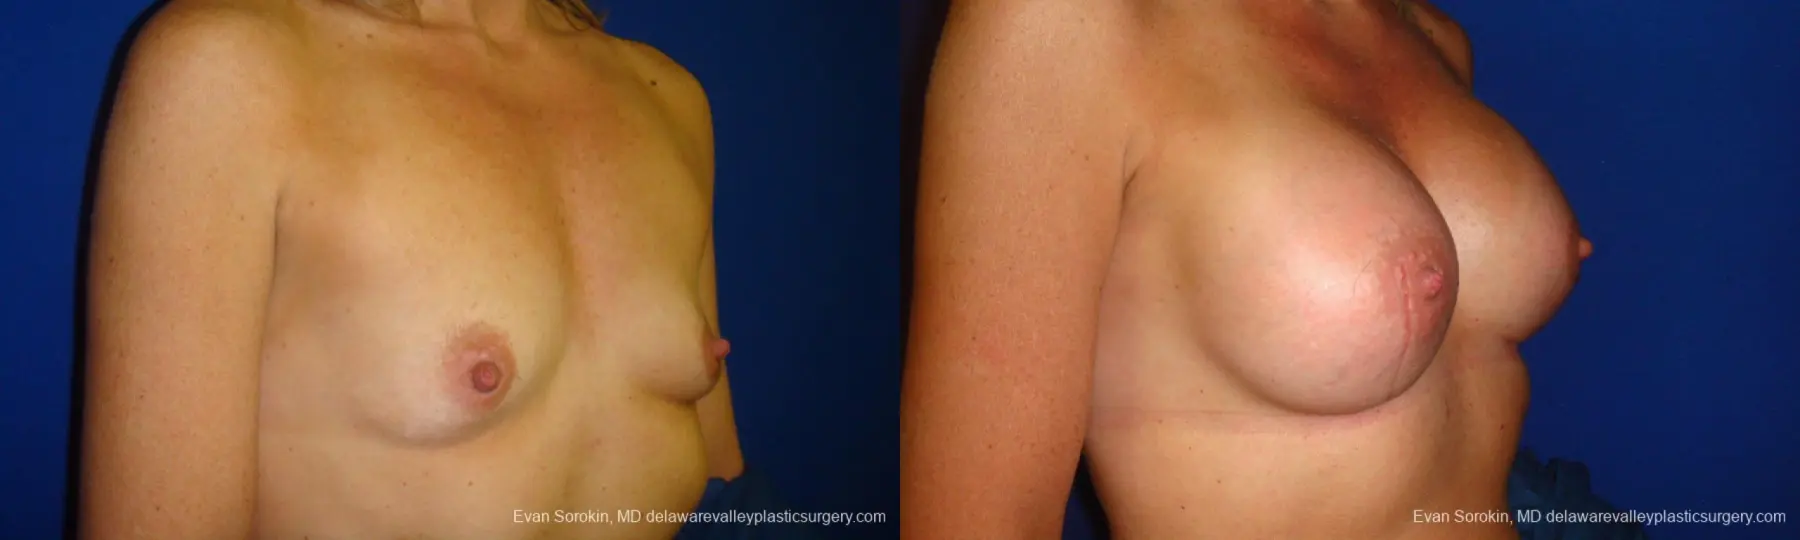 Philadelphia Breast Augmentation 9412 - Before and After 2